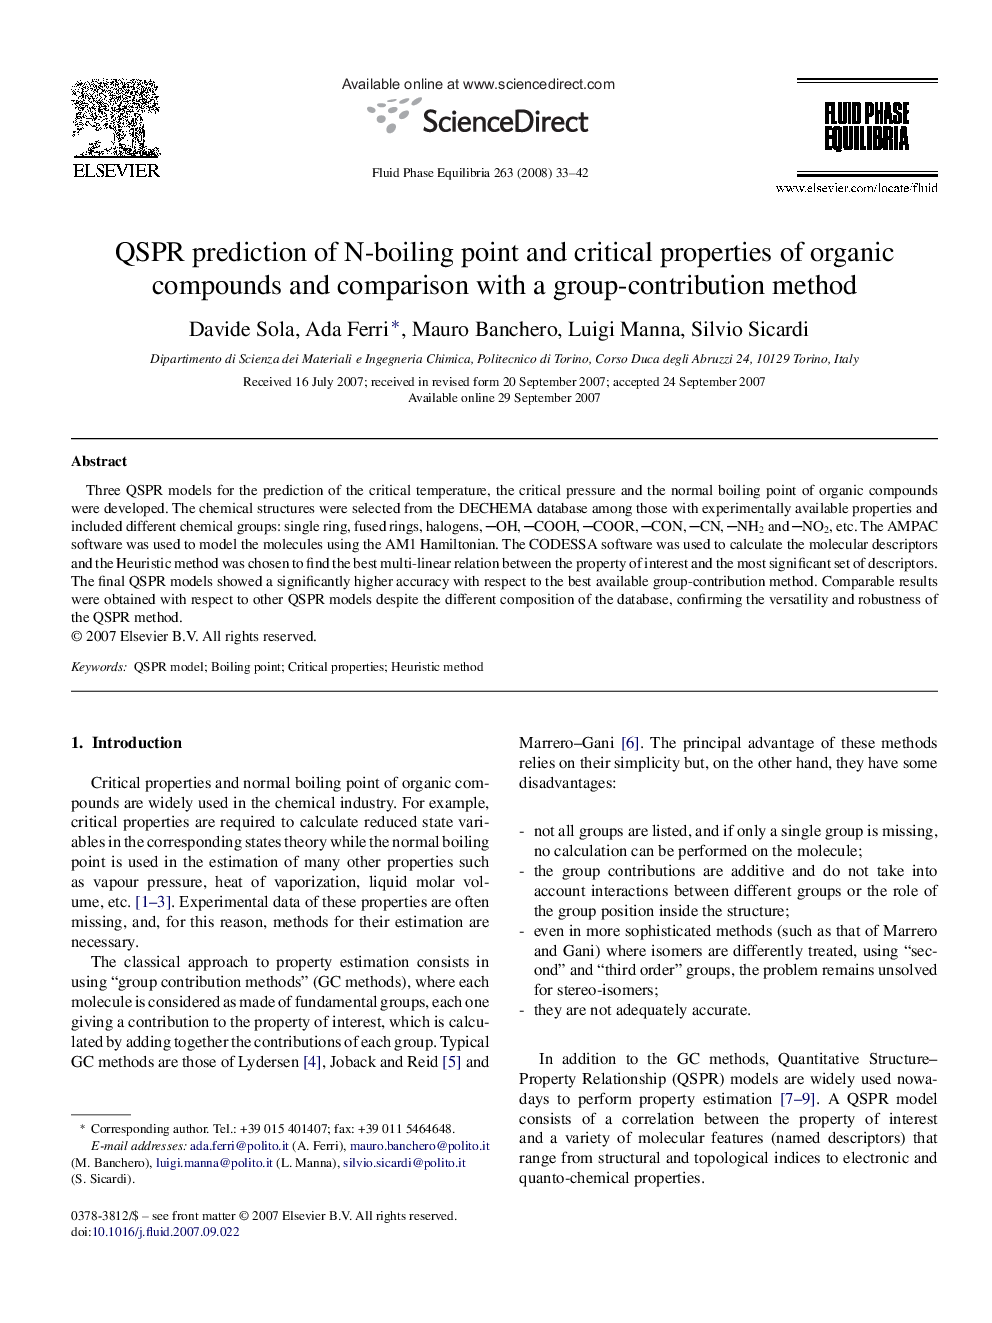 QSPR prediction of N-boiling point and critical properties of organic compounds and comparison with a group-contribution method